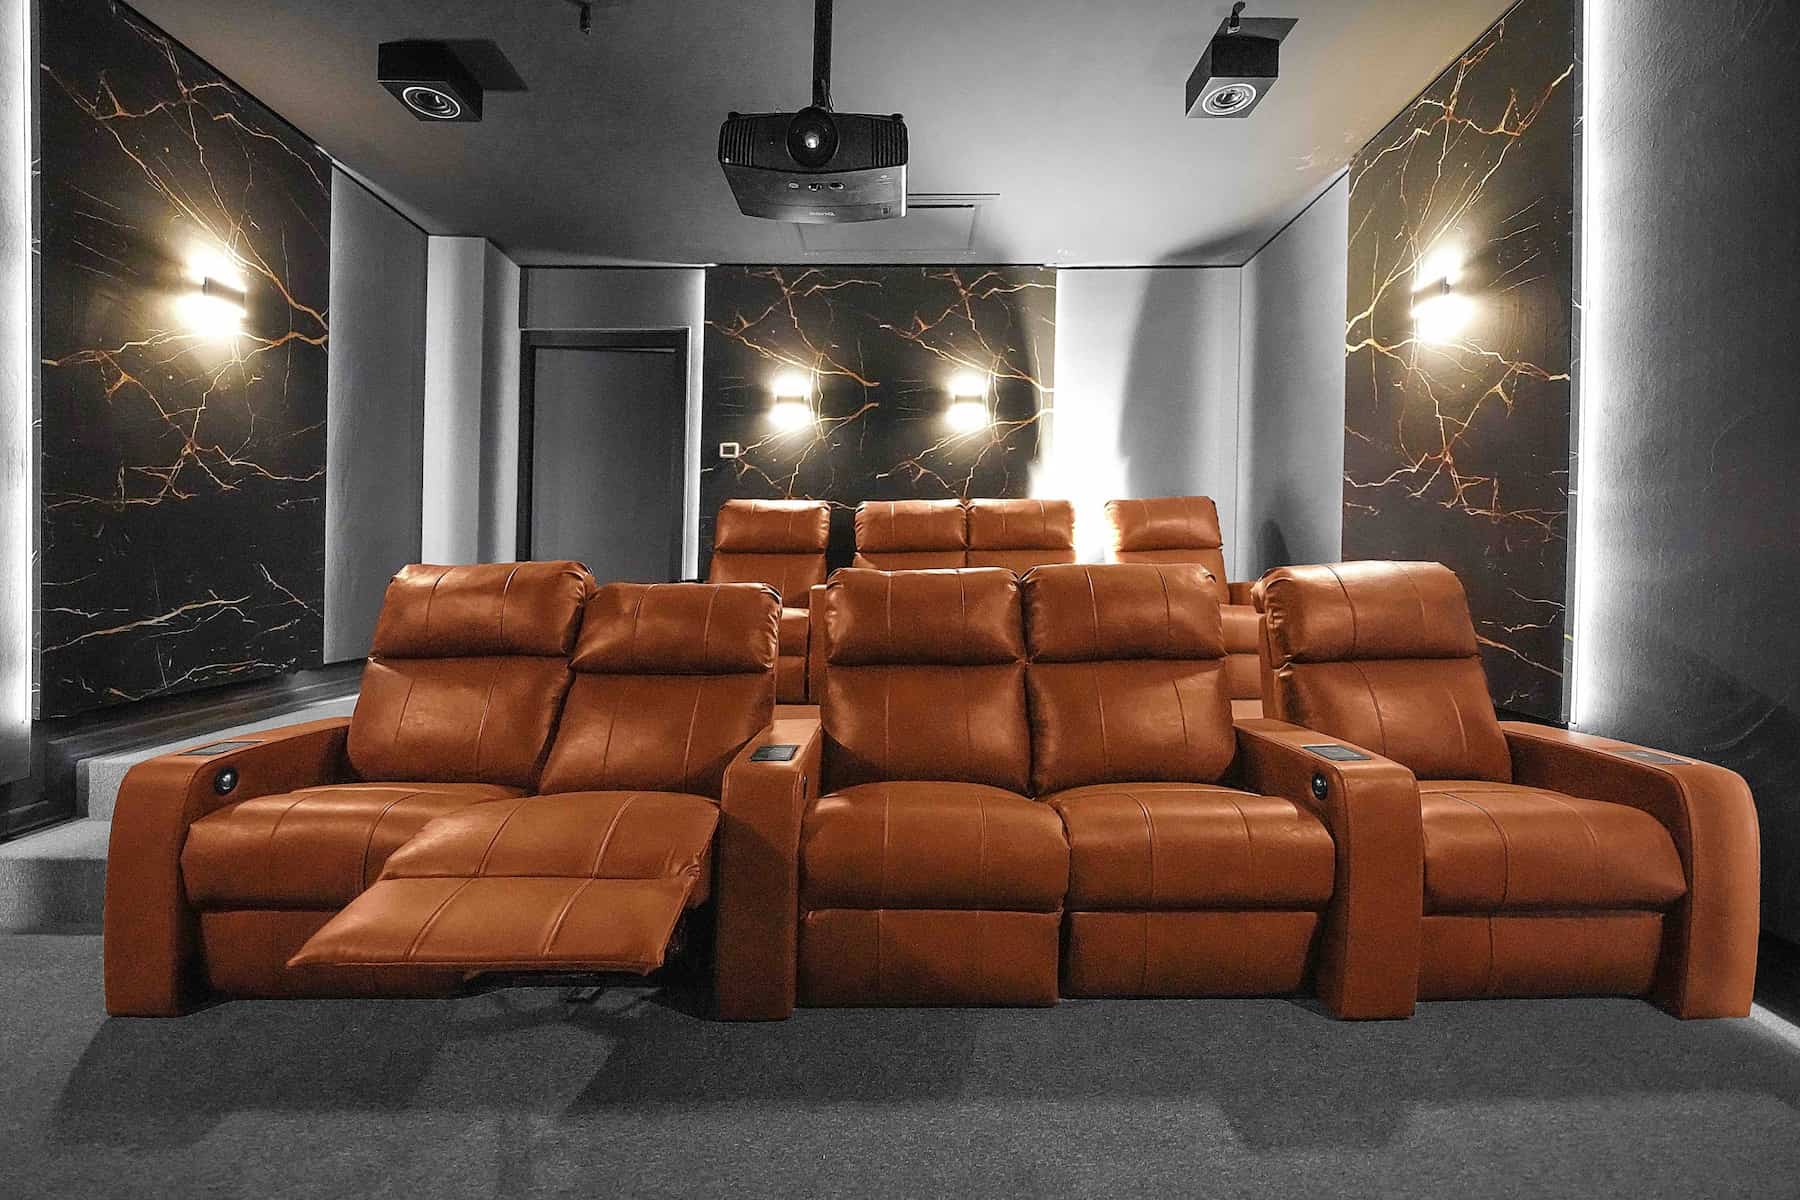 Crystal Rose Home theater